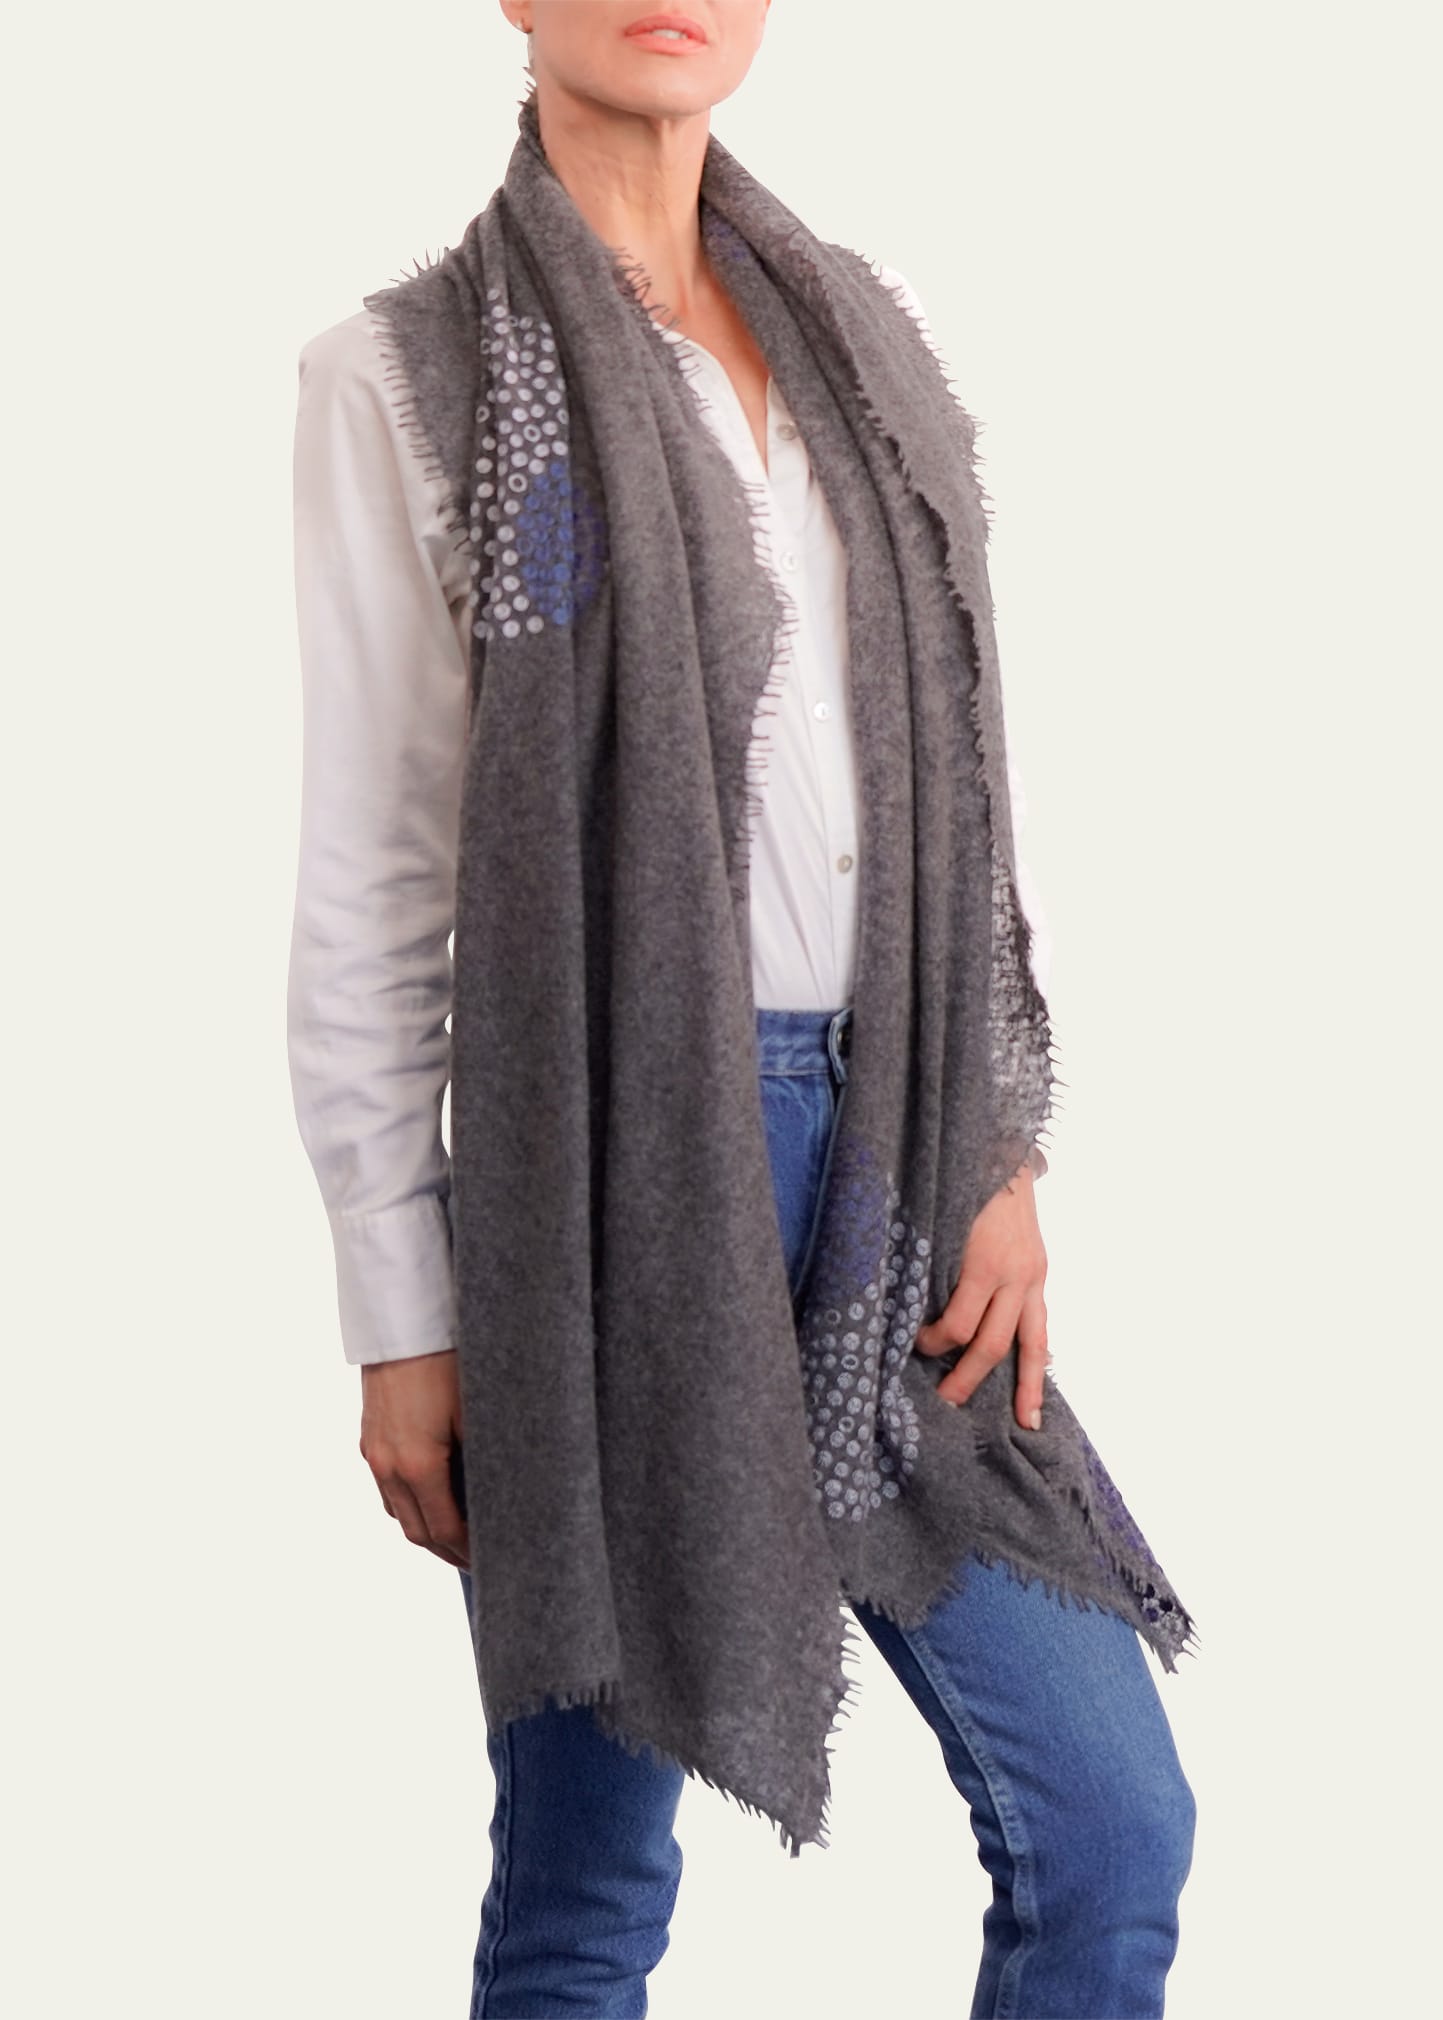 Ian Saude Scattershot Cashmere Scarf In Charcoal